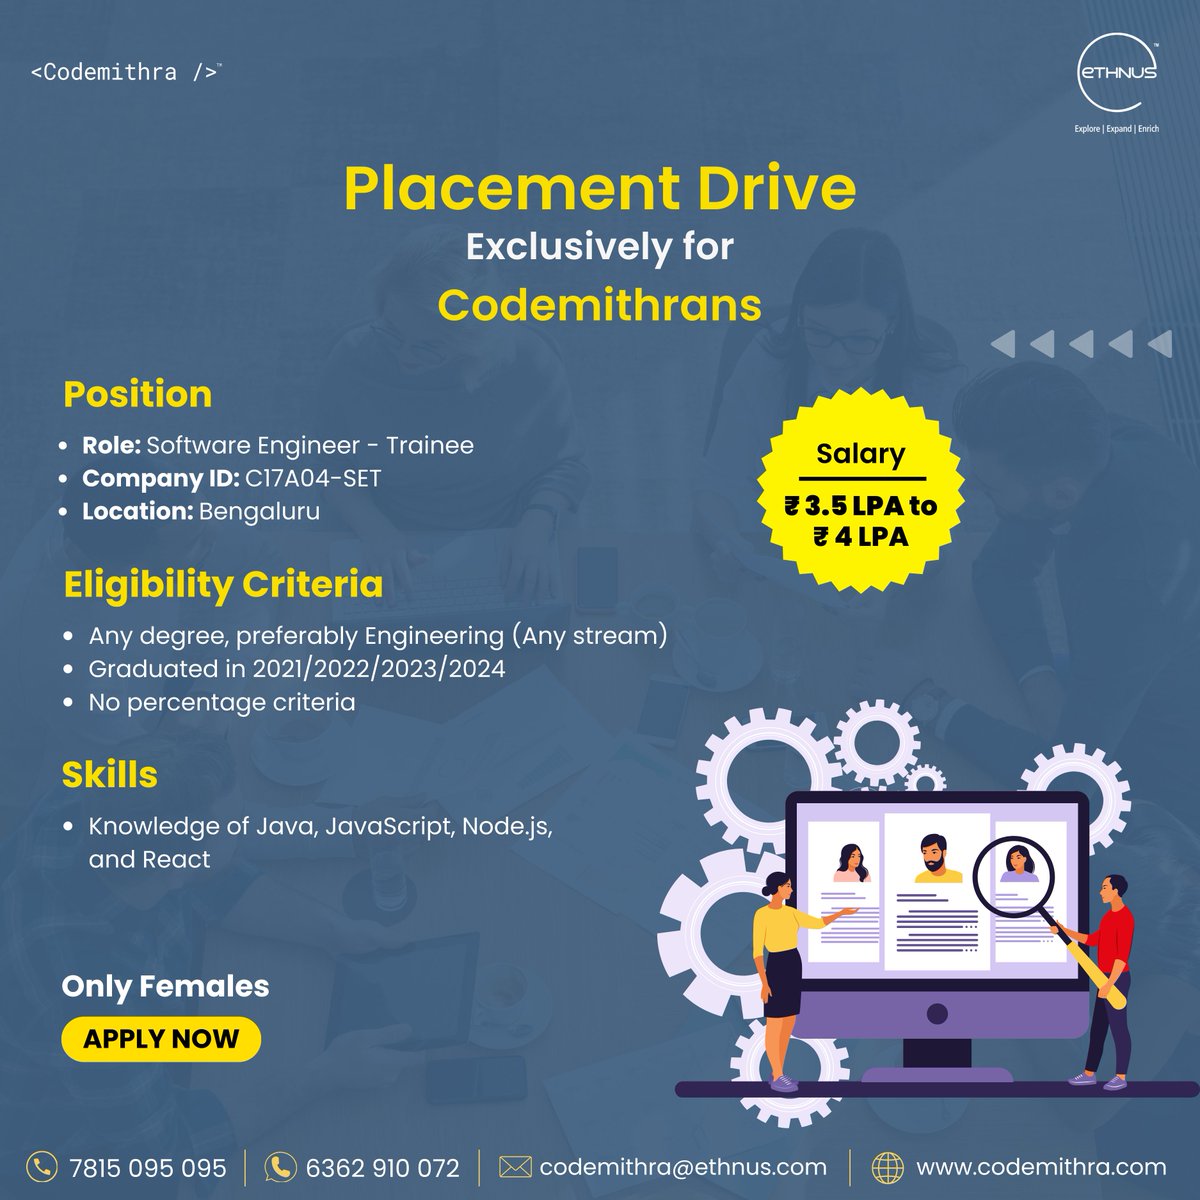 Build a career of your choice in emerging technology.

Visit: codemithra.com/mern-stack/

#PlacementDrive #joboffer #career #tech #jobseekers #technology #job #jobhunt #jobhiring #jobalert #jobforyou #jobhunting #opportunity #skills #training #placements #developer #cybersecurity